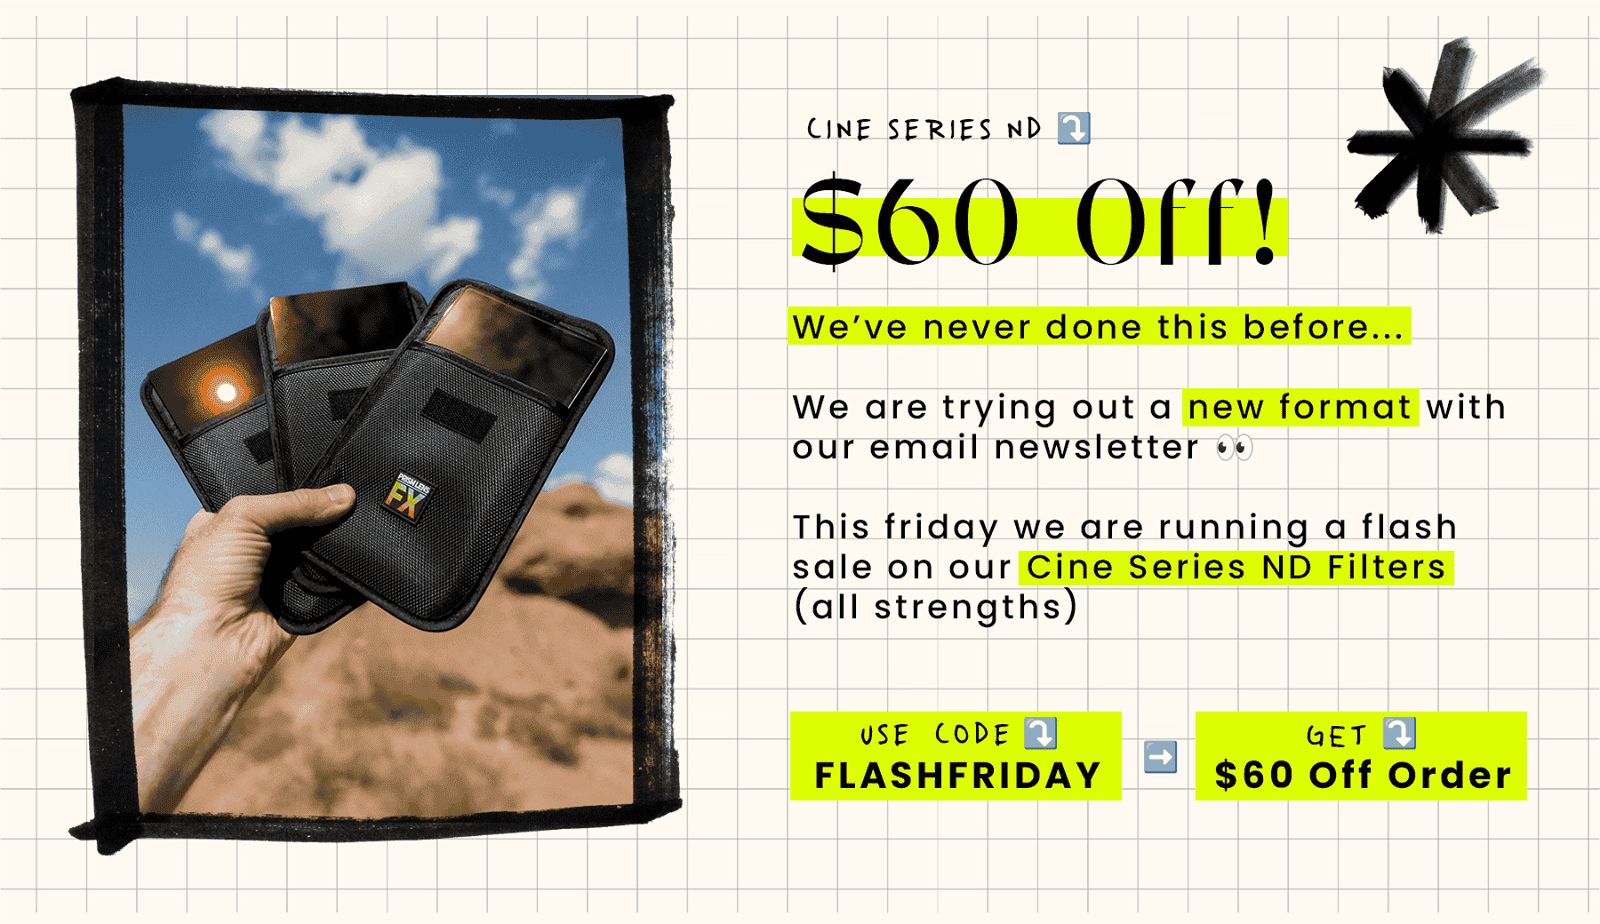 We are trying something new, we are doing a flash sale on our Cine Series ND Filters!